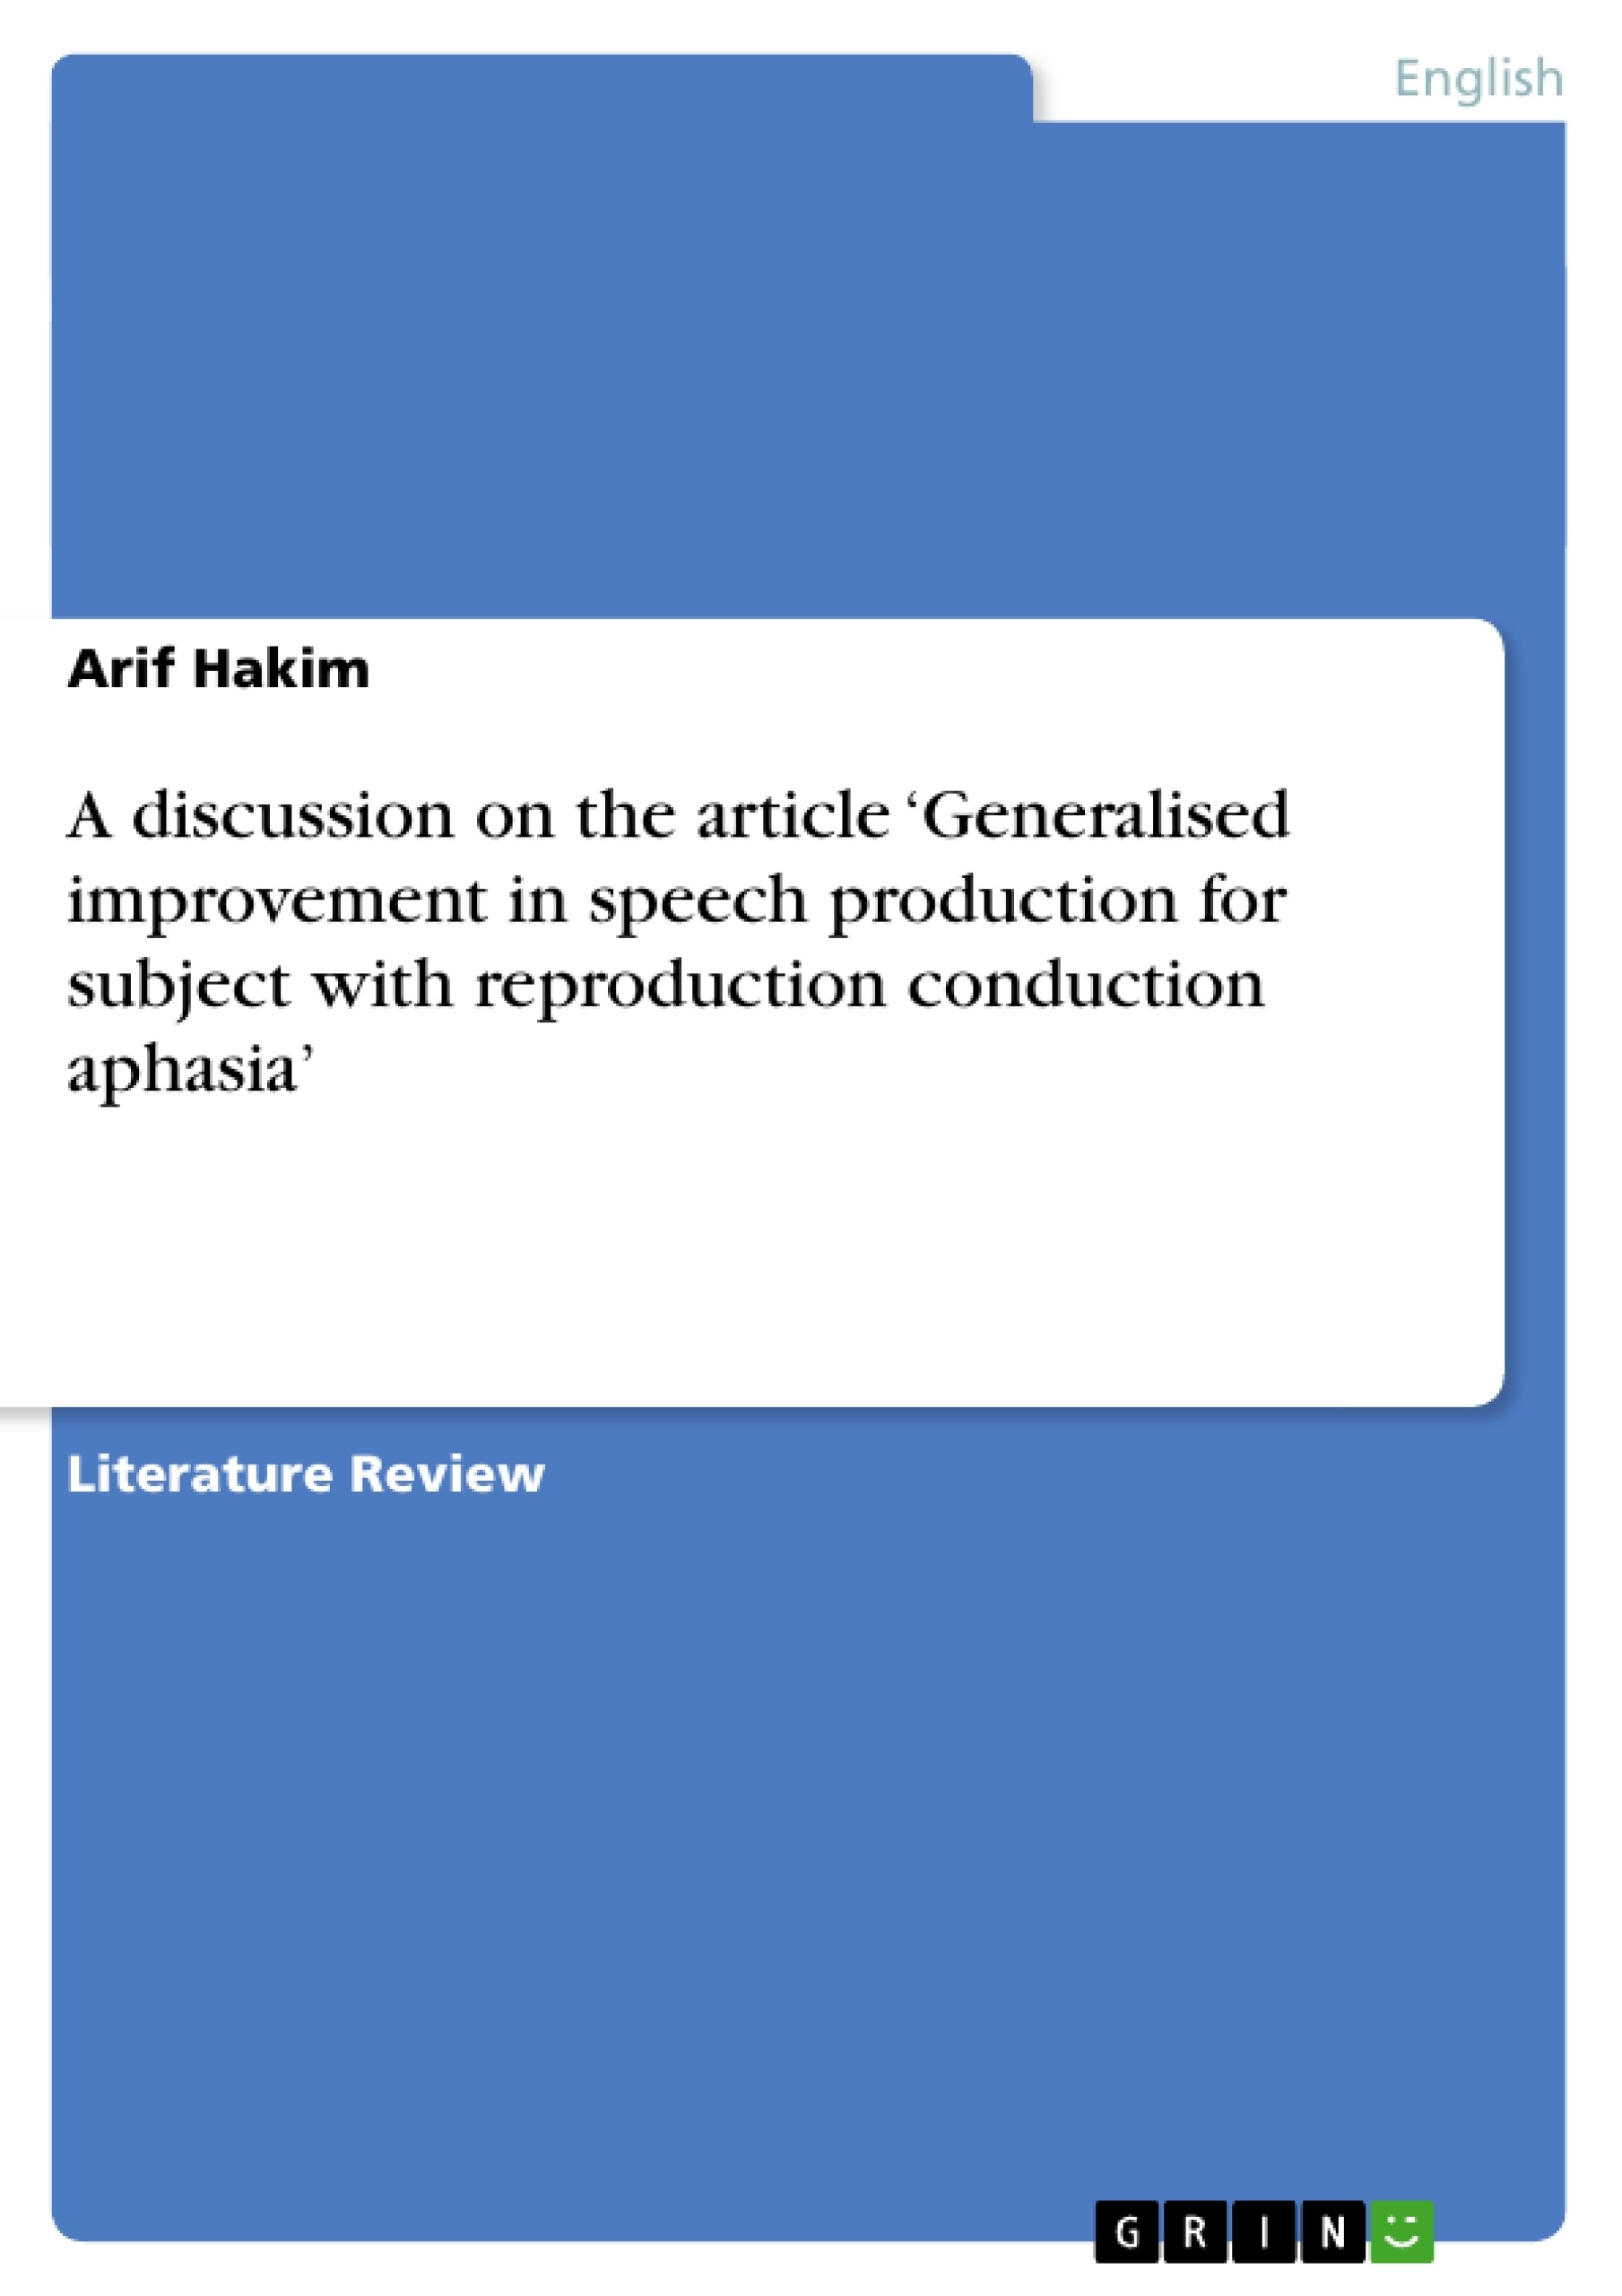 Titre: A discussion on the article ‘Generalised improvement in speech production for subject with reproduction conduction aphasia’